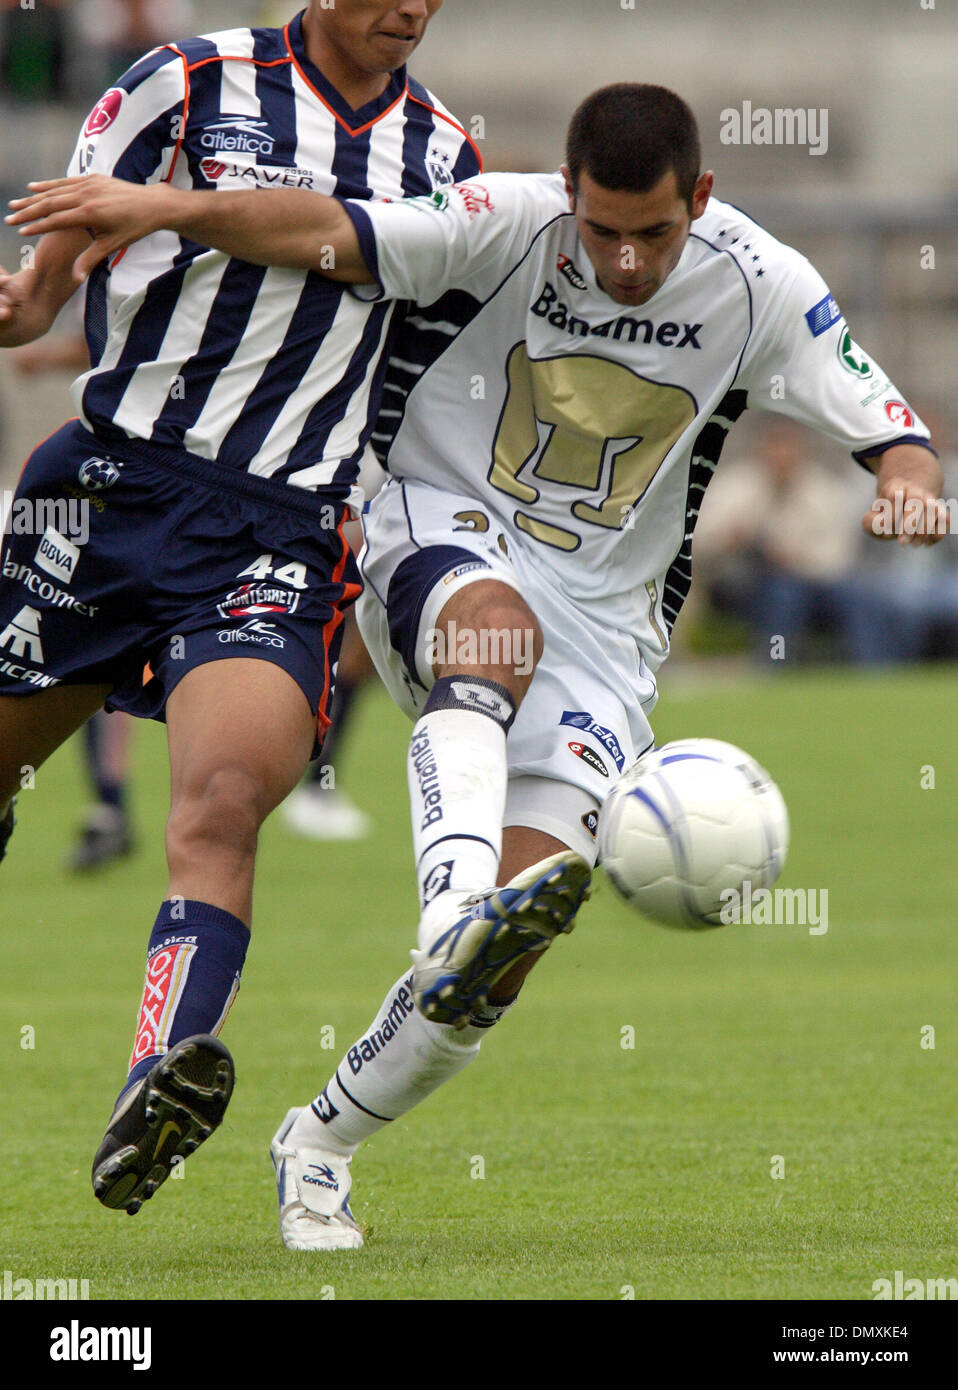 Feb 26, 2006; Mexico City, MEXICO; UNAM Pumas defender Raul Salinas in  action during the soccer match with Monterrey Rayados at the Mexico City's  University Stadium. UNAM tied 0-0 to Monterrey. Mandatory